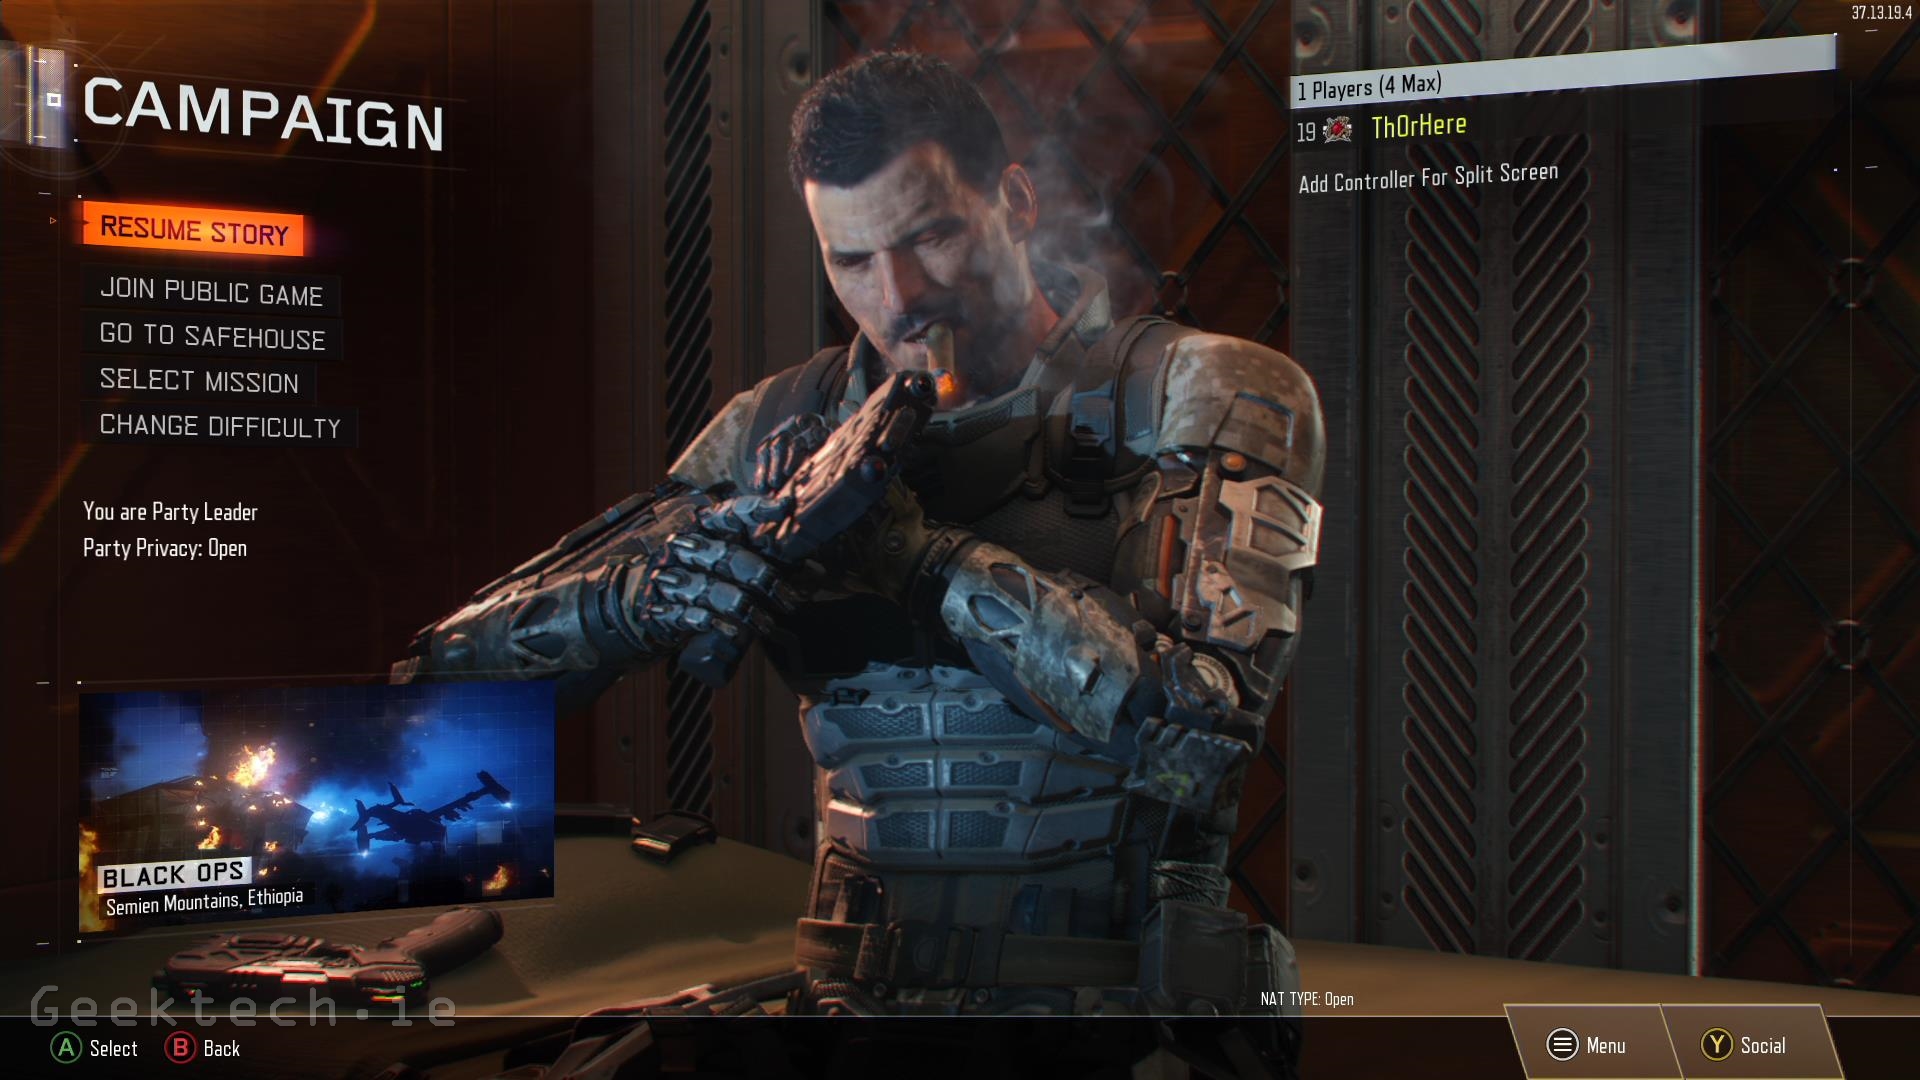 Call of Duty Black Ops 3 Review